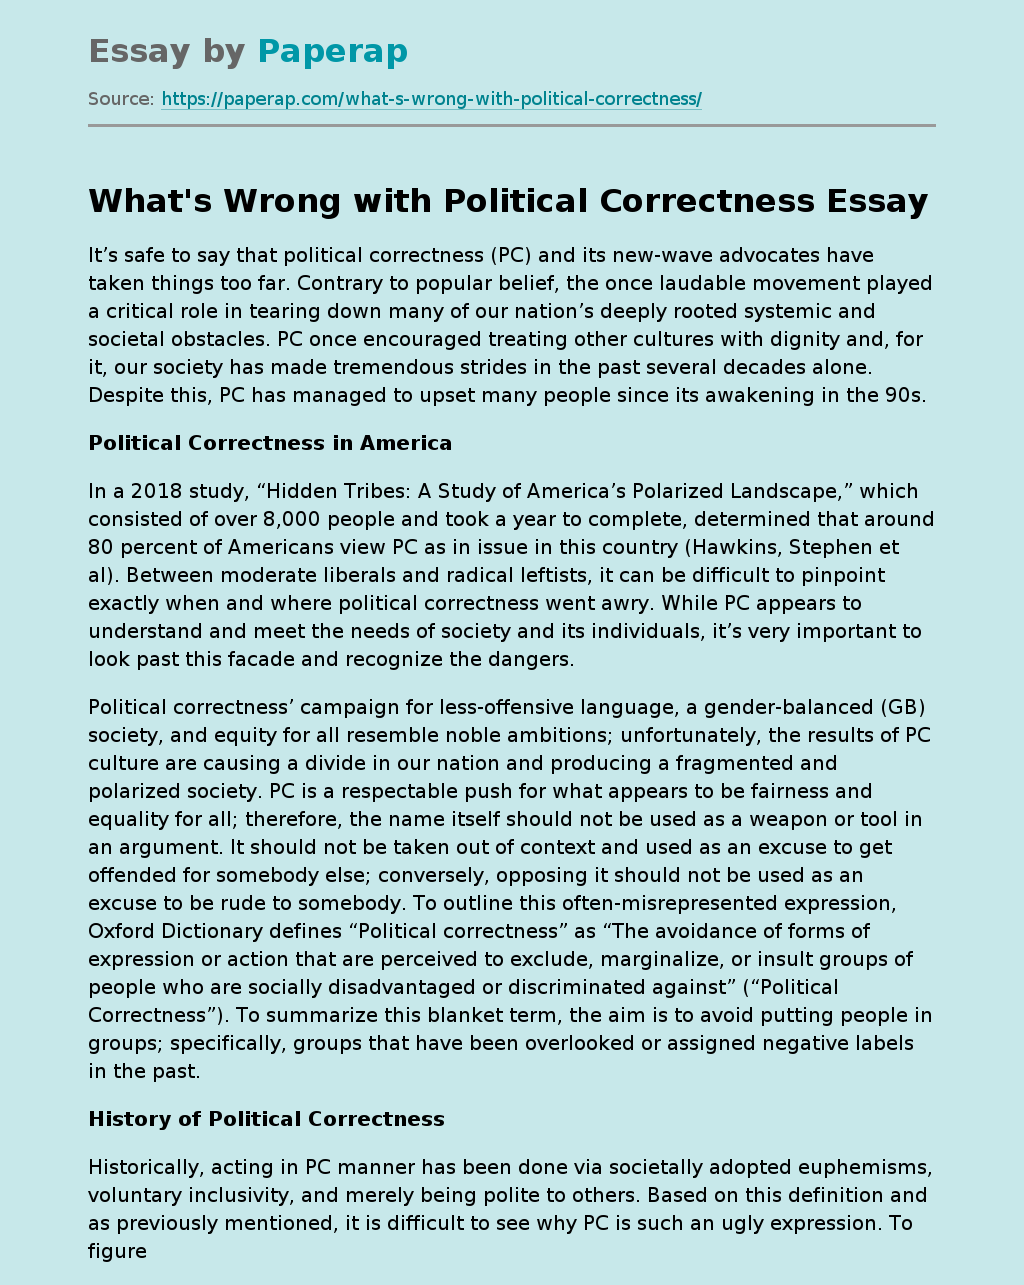 What's Wrong with Political Correctness